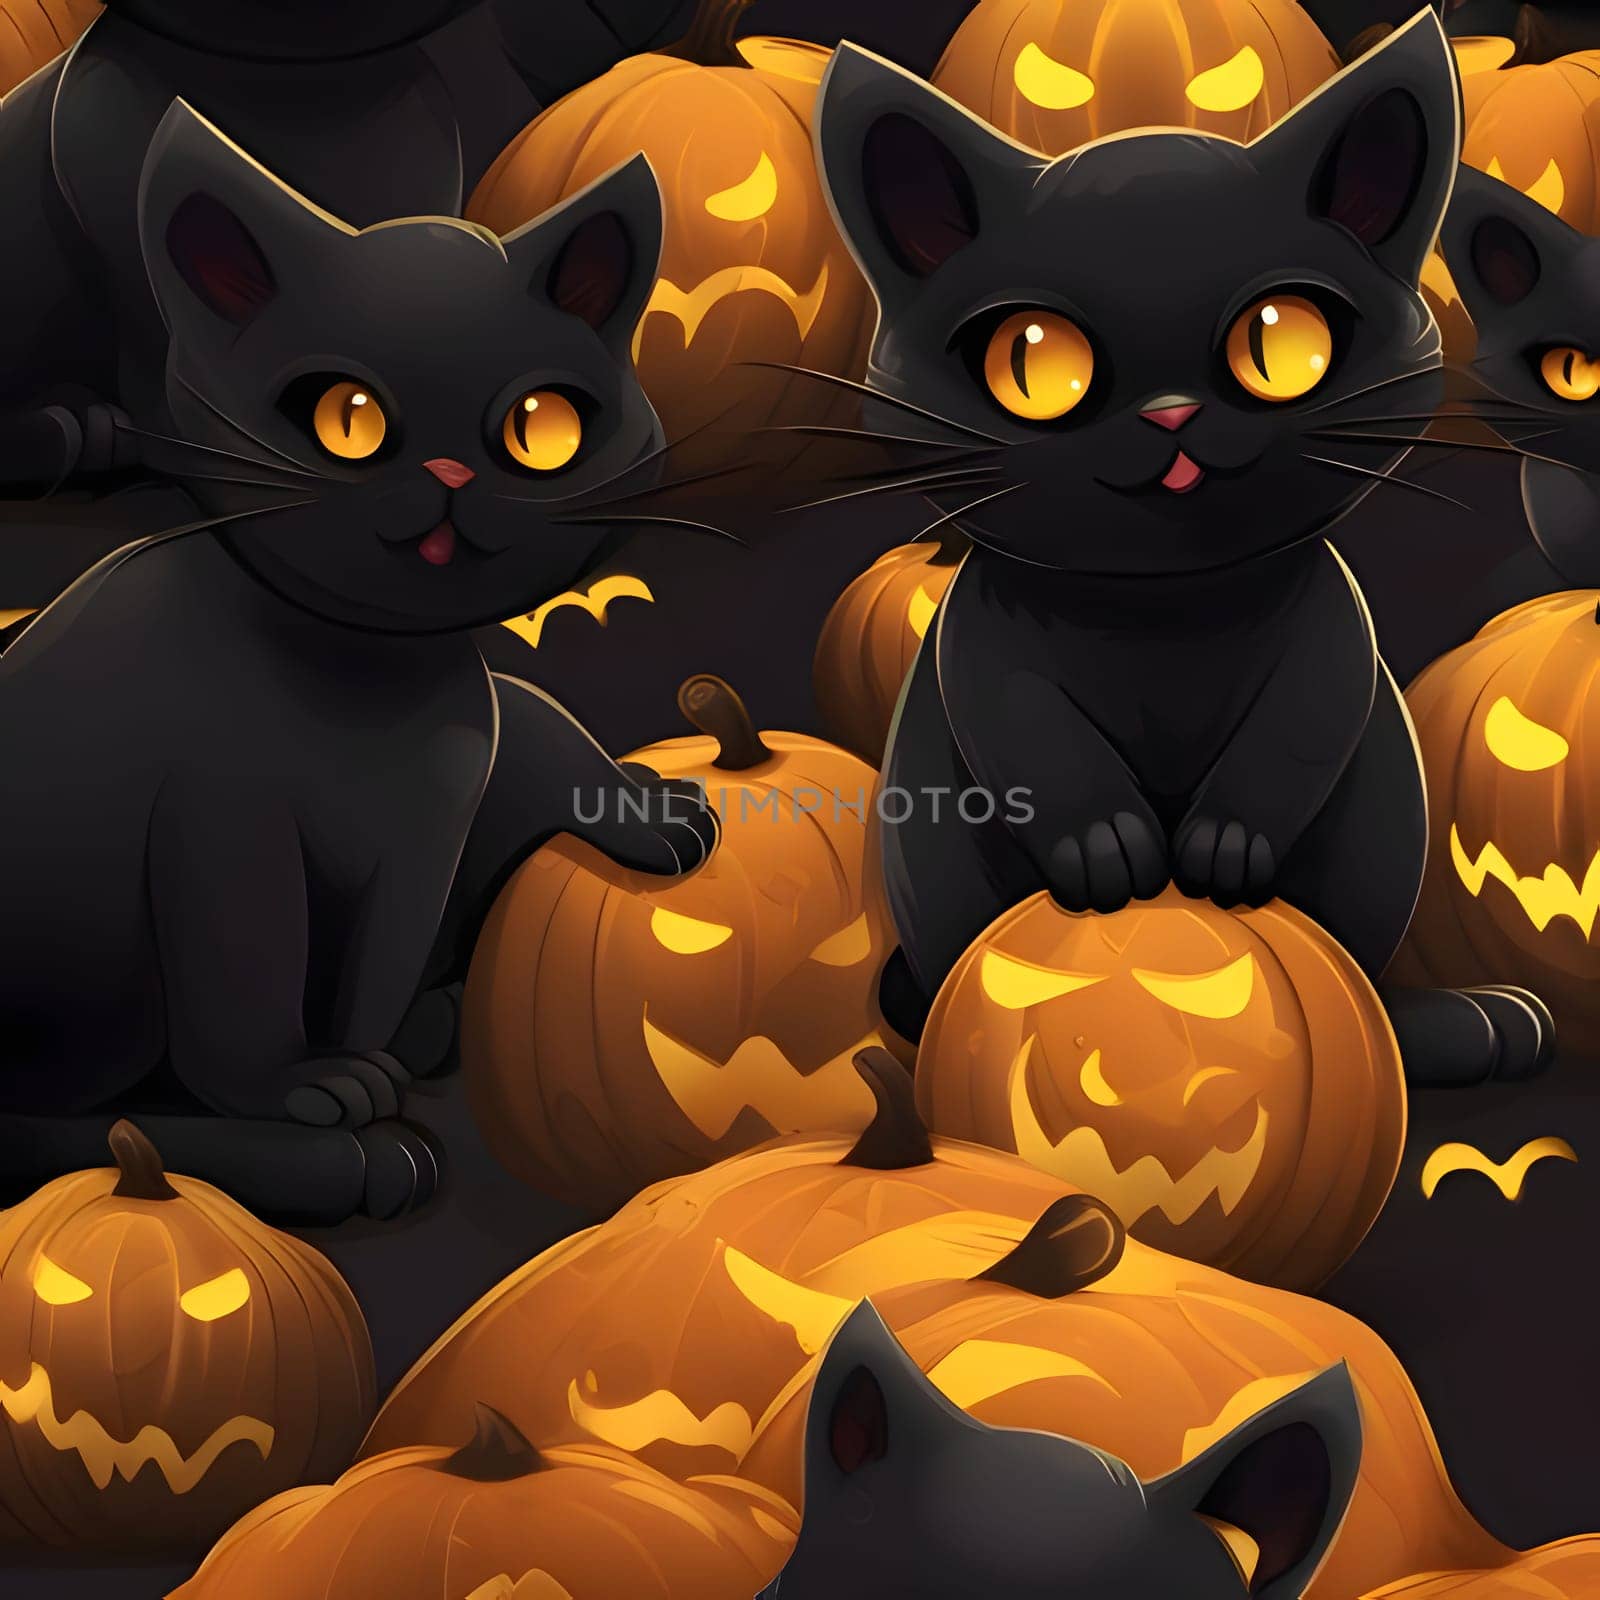 Black cats and glowing jack-o-lantern pumpkins, a Halloween image. Atmosphere of darkness and fear.